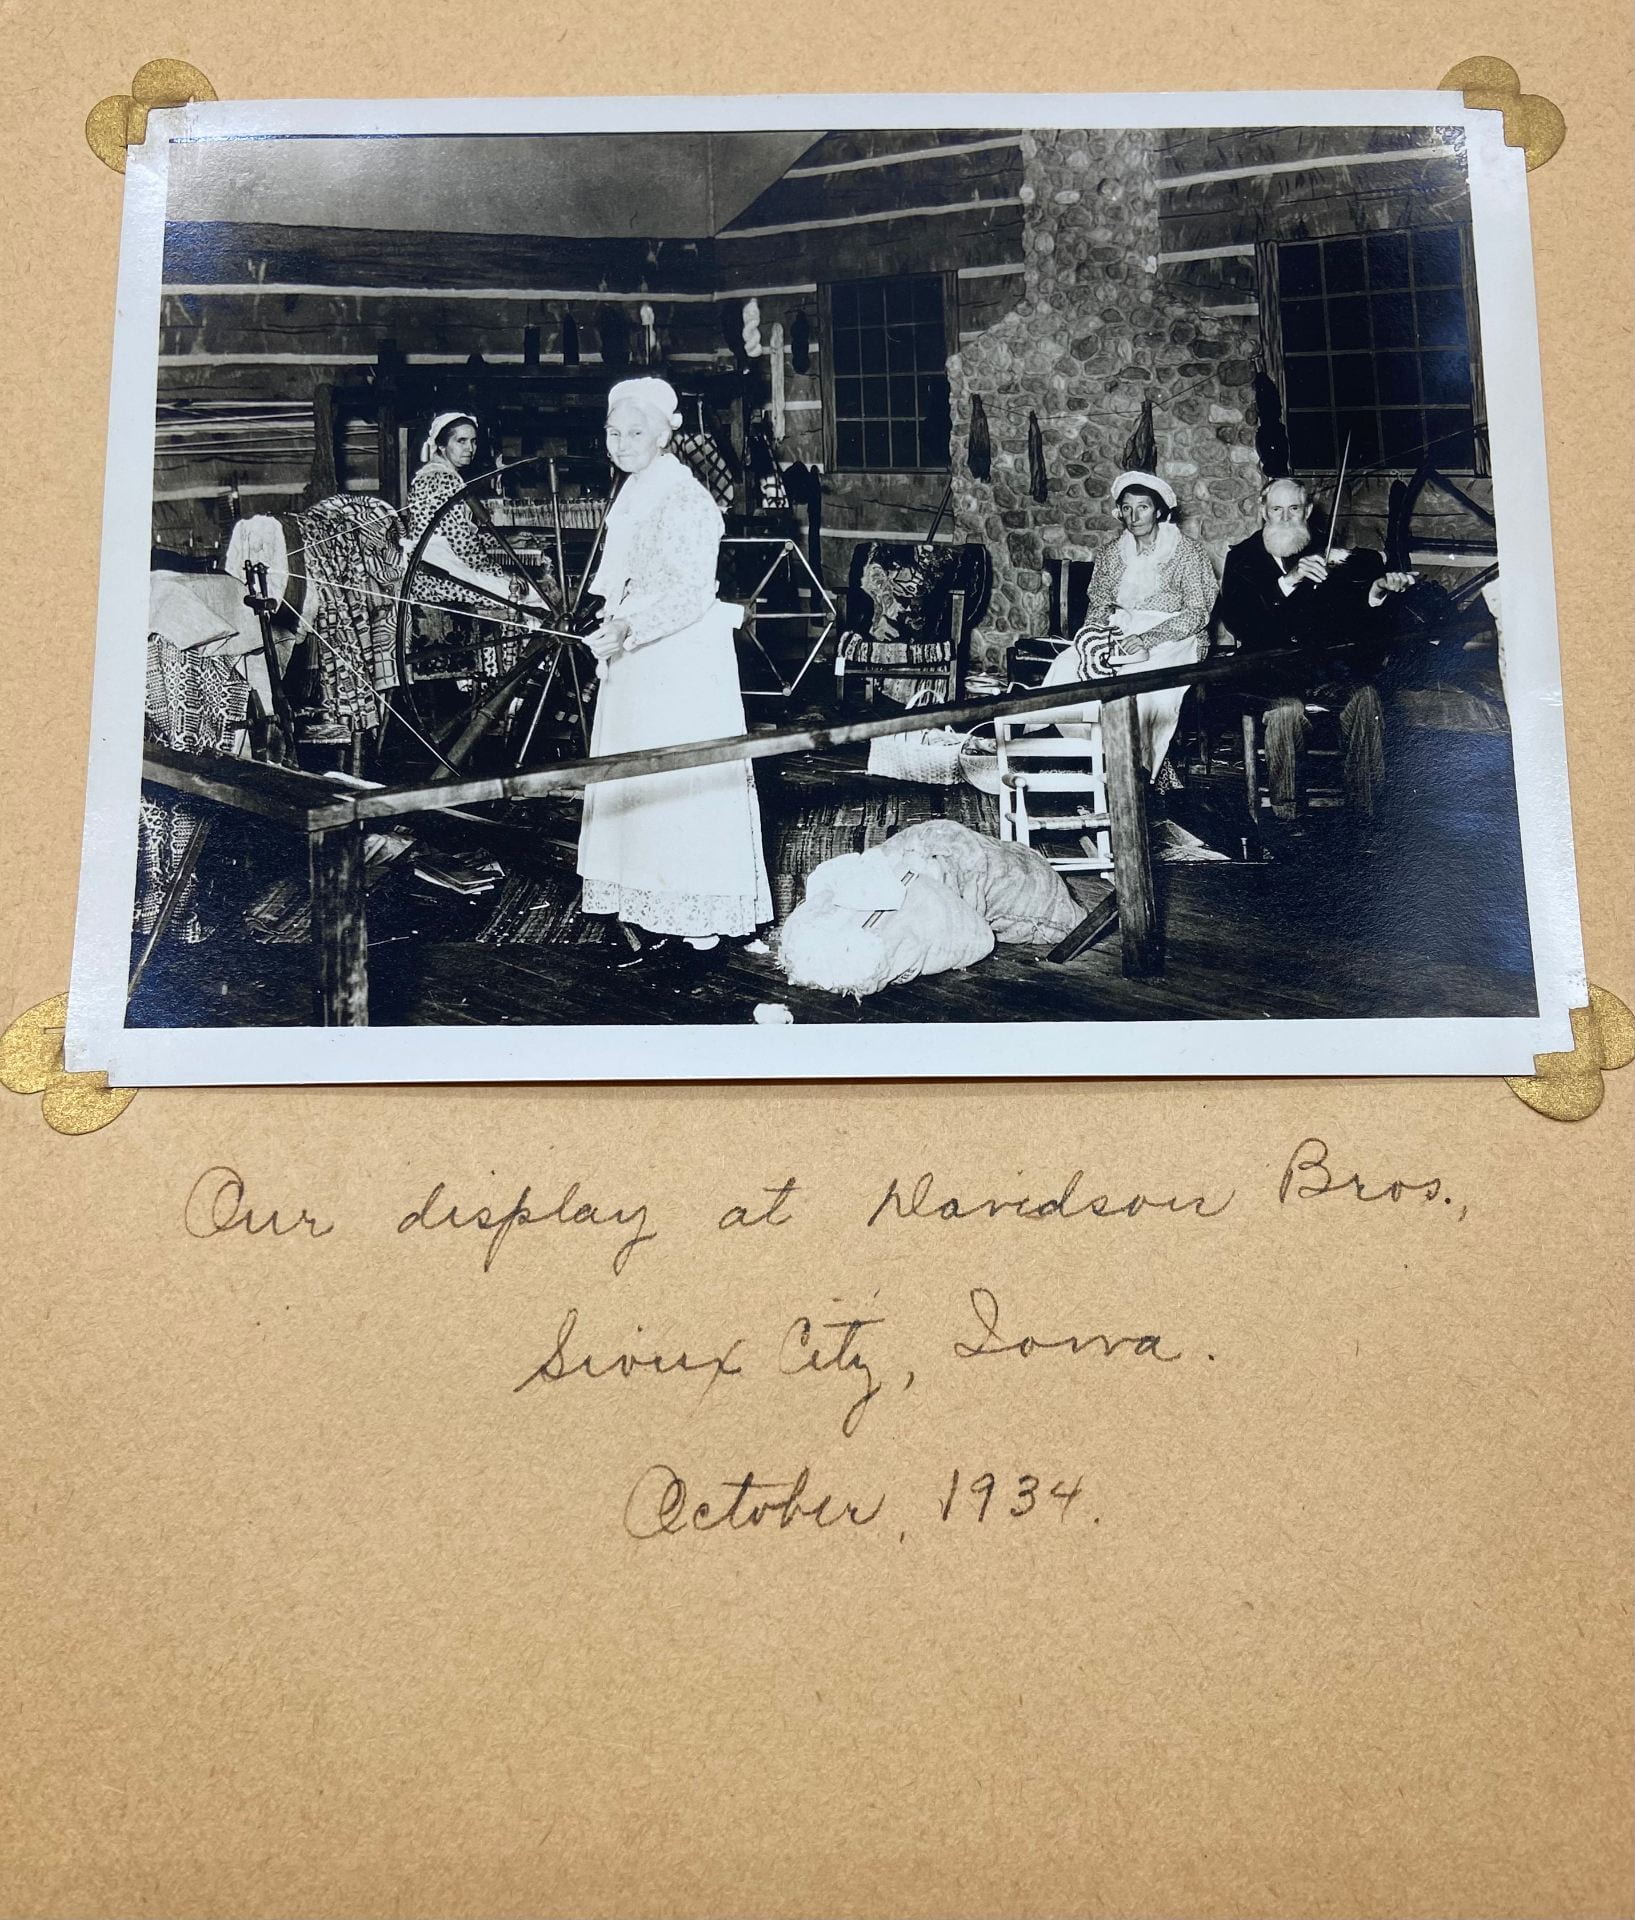 A faded page with a black and white photograph adhered and an inscription that says "Our display at Davidson Bros. Sioux City, Iowa. October 1934." The black and white photo features a log cabin interior and four people posed in historical clothing around traditional spinning wheels.